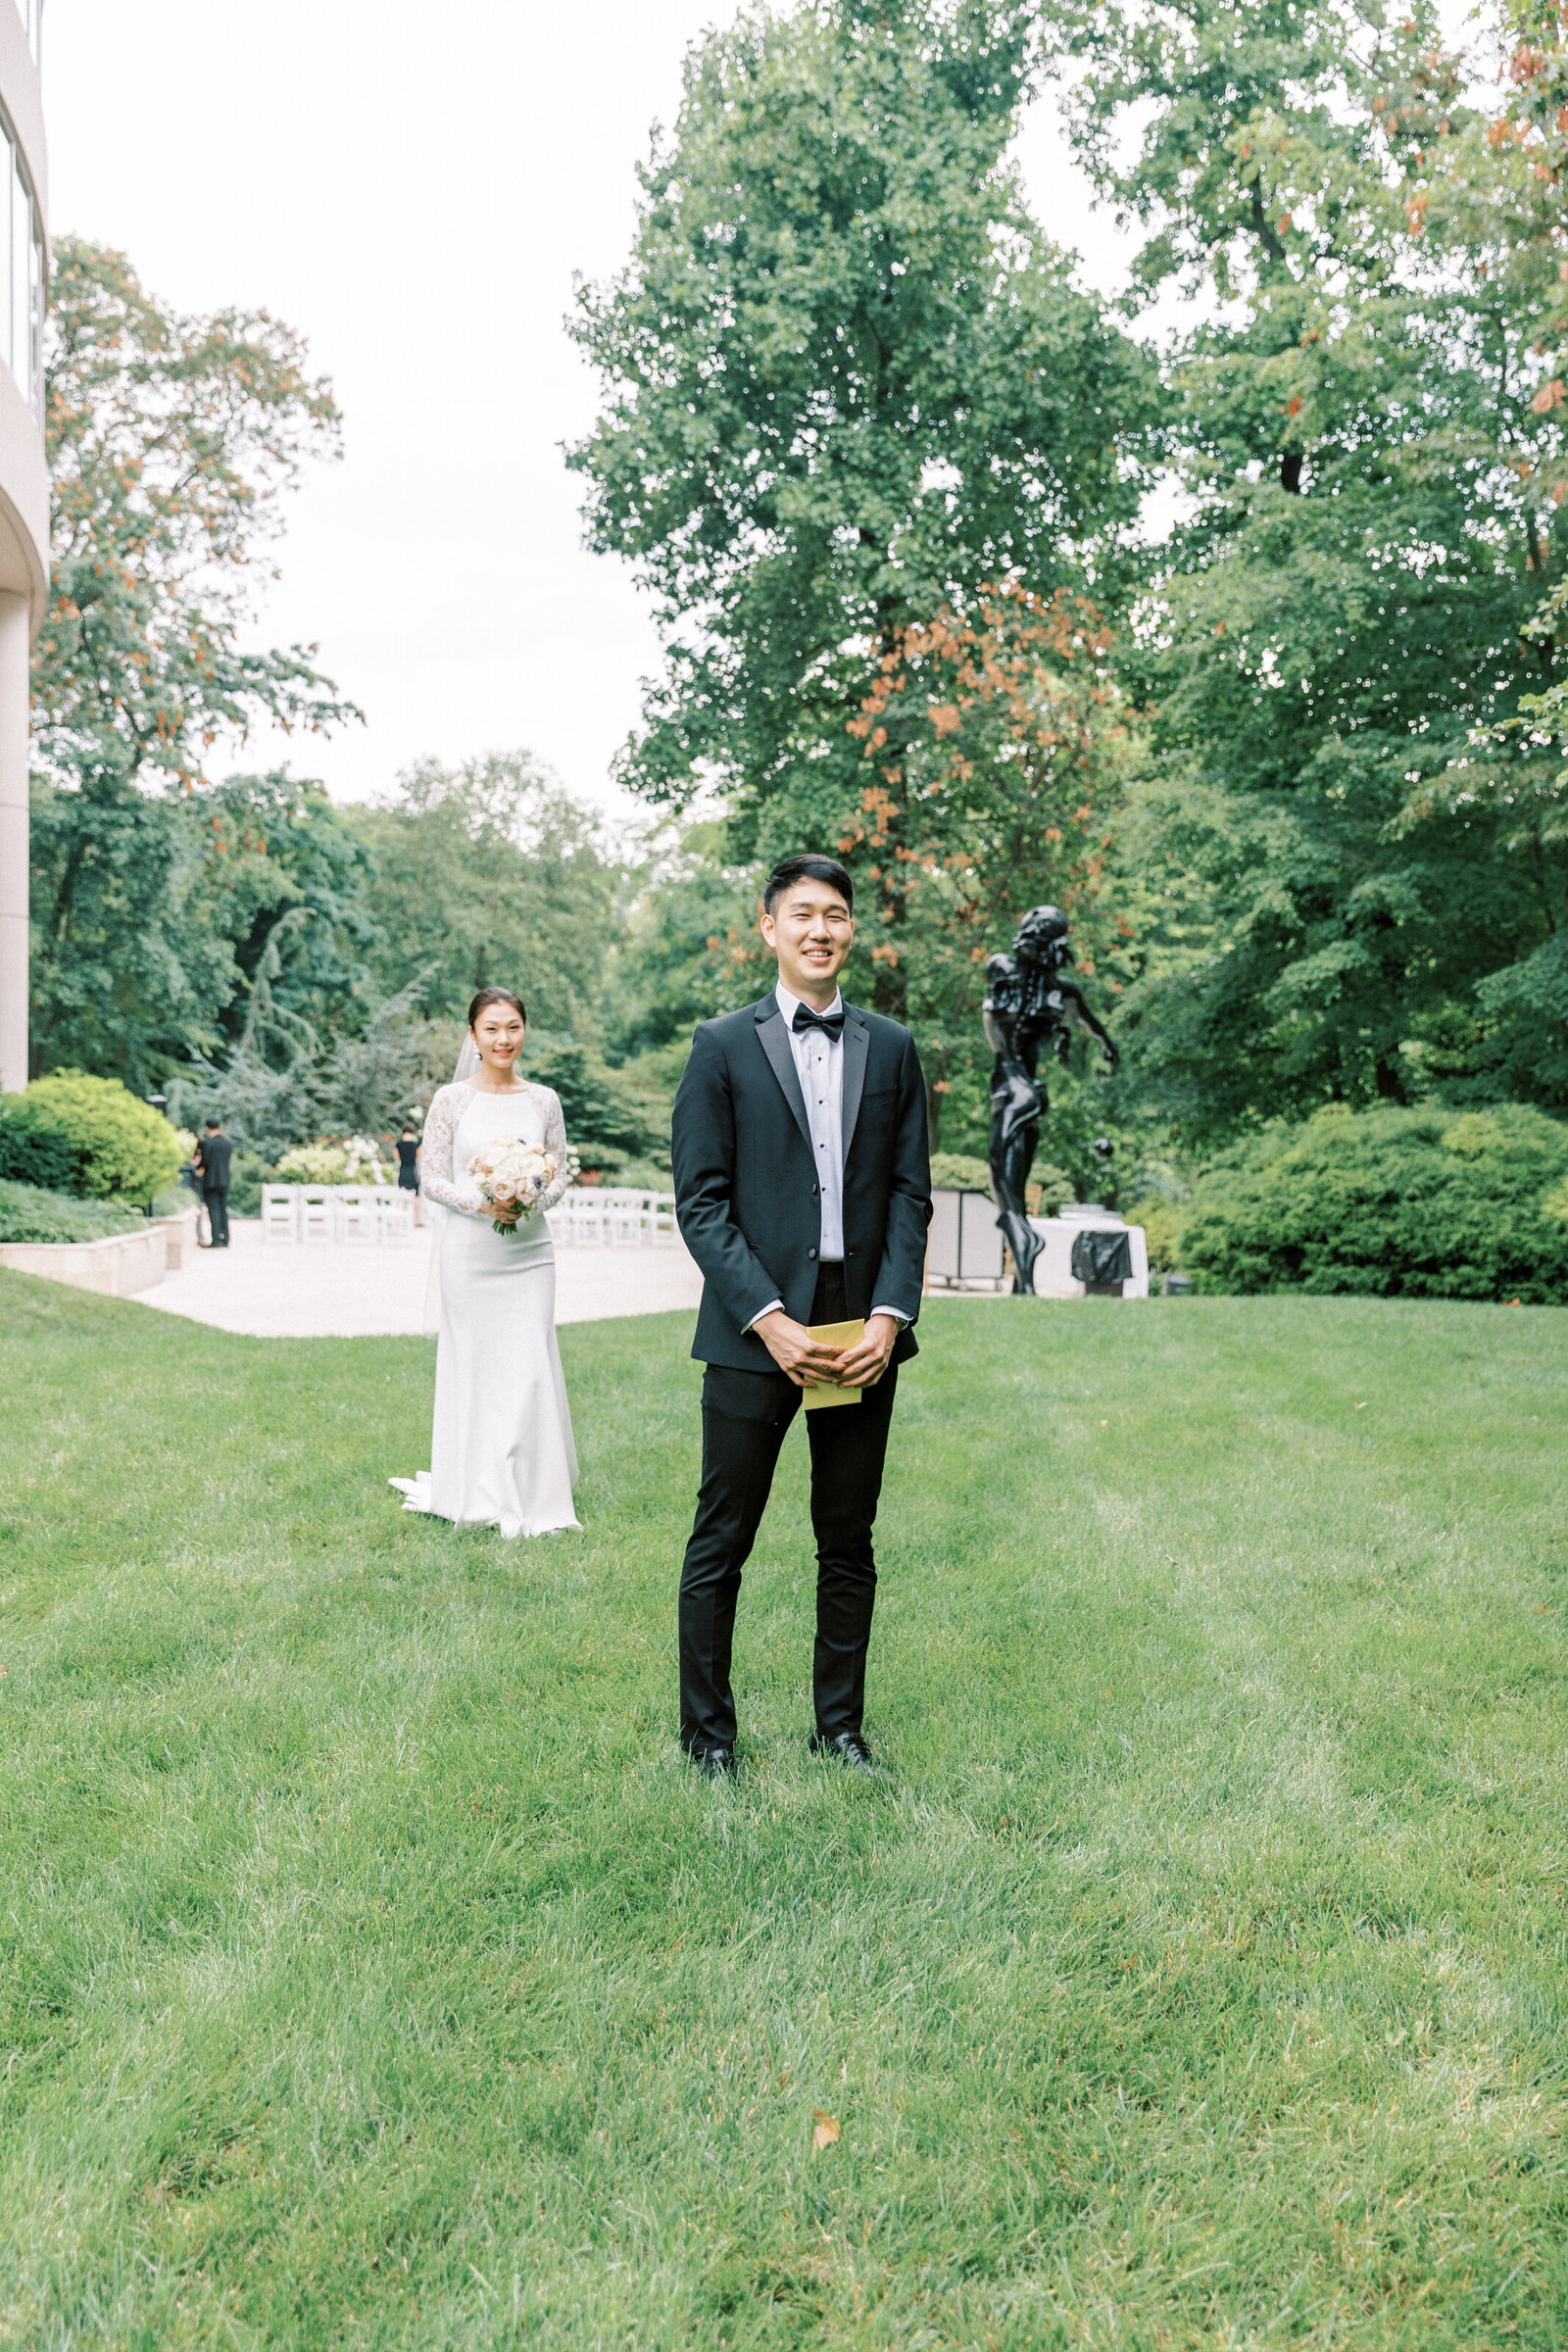 Bride walks up behind the groom for first look